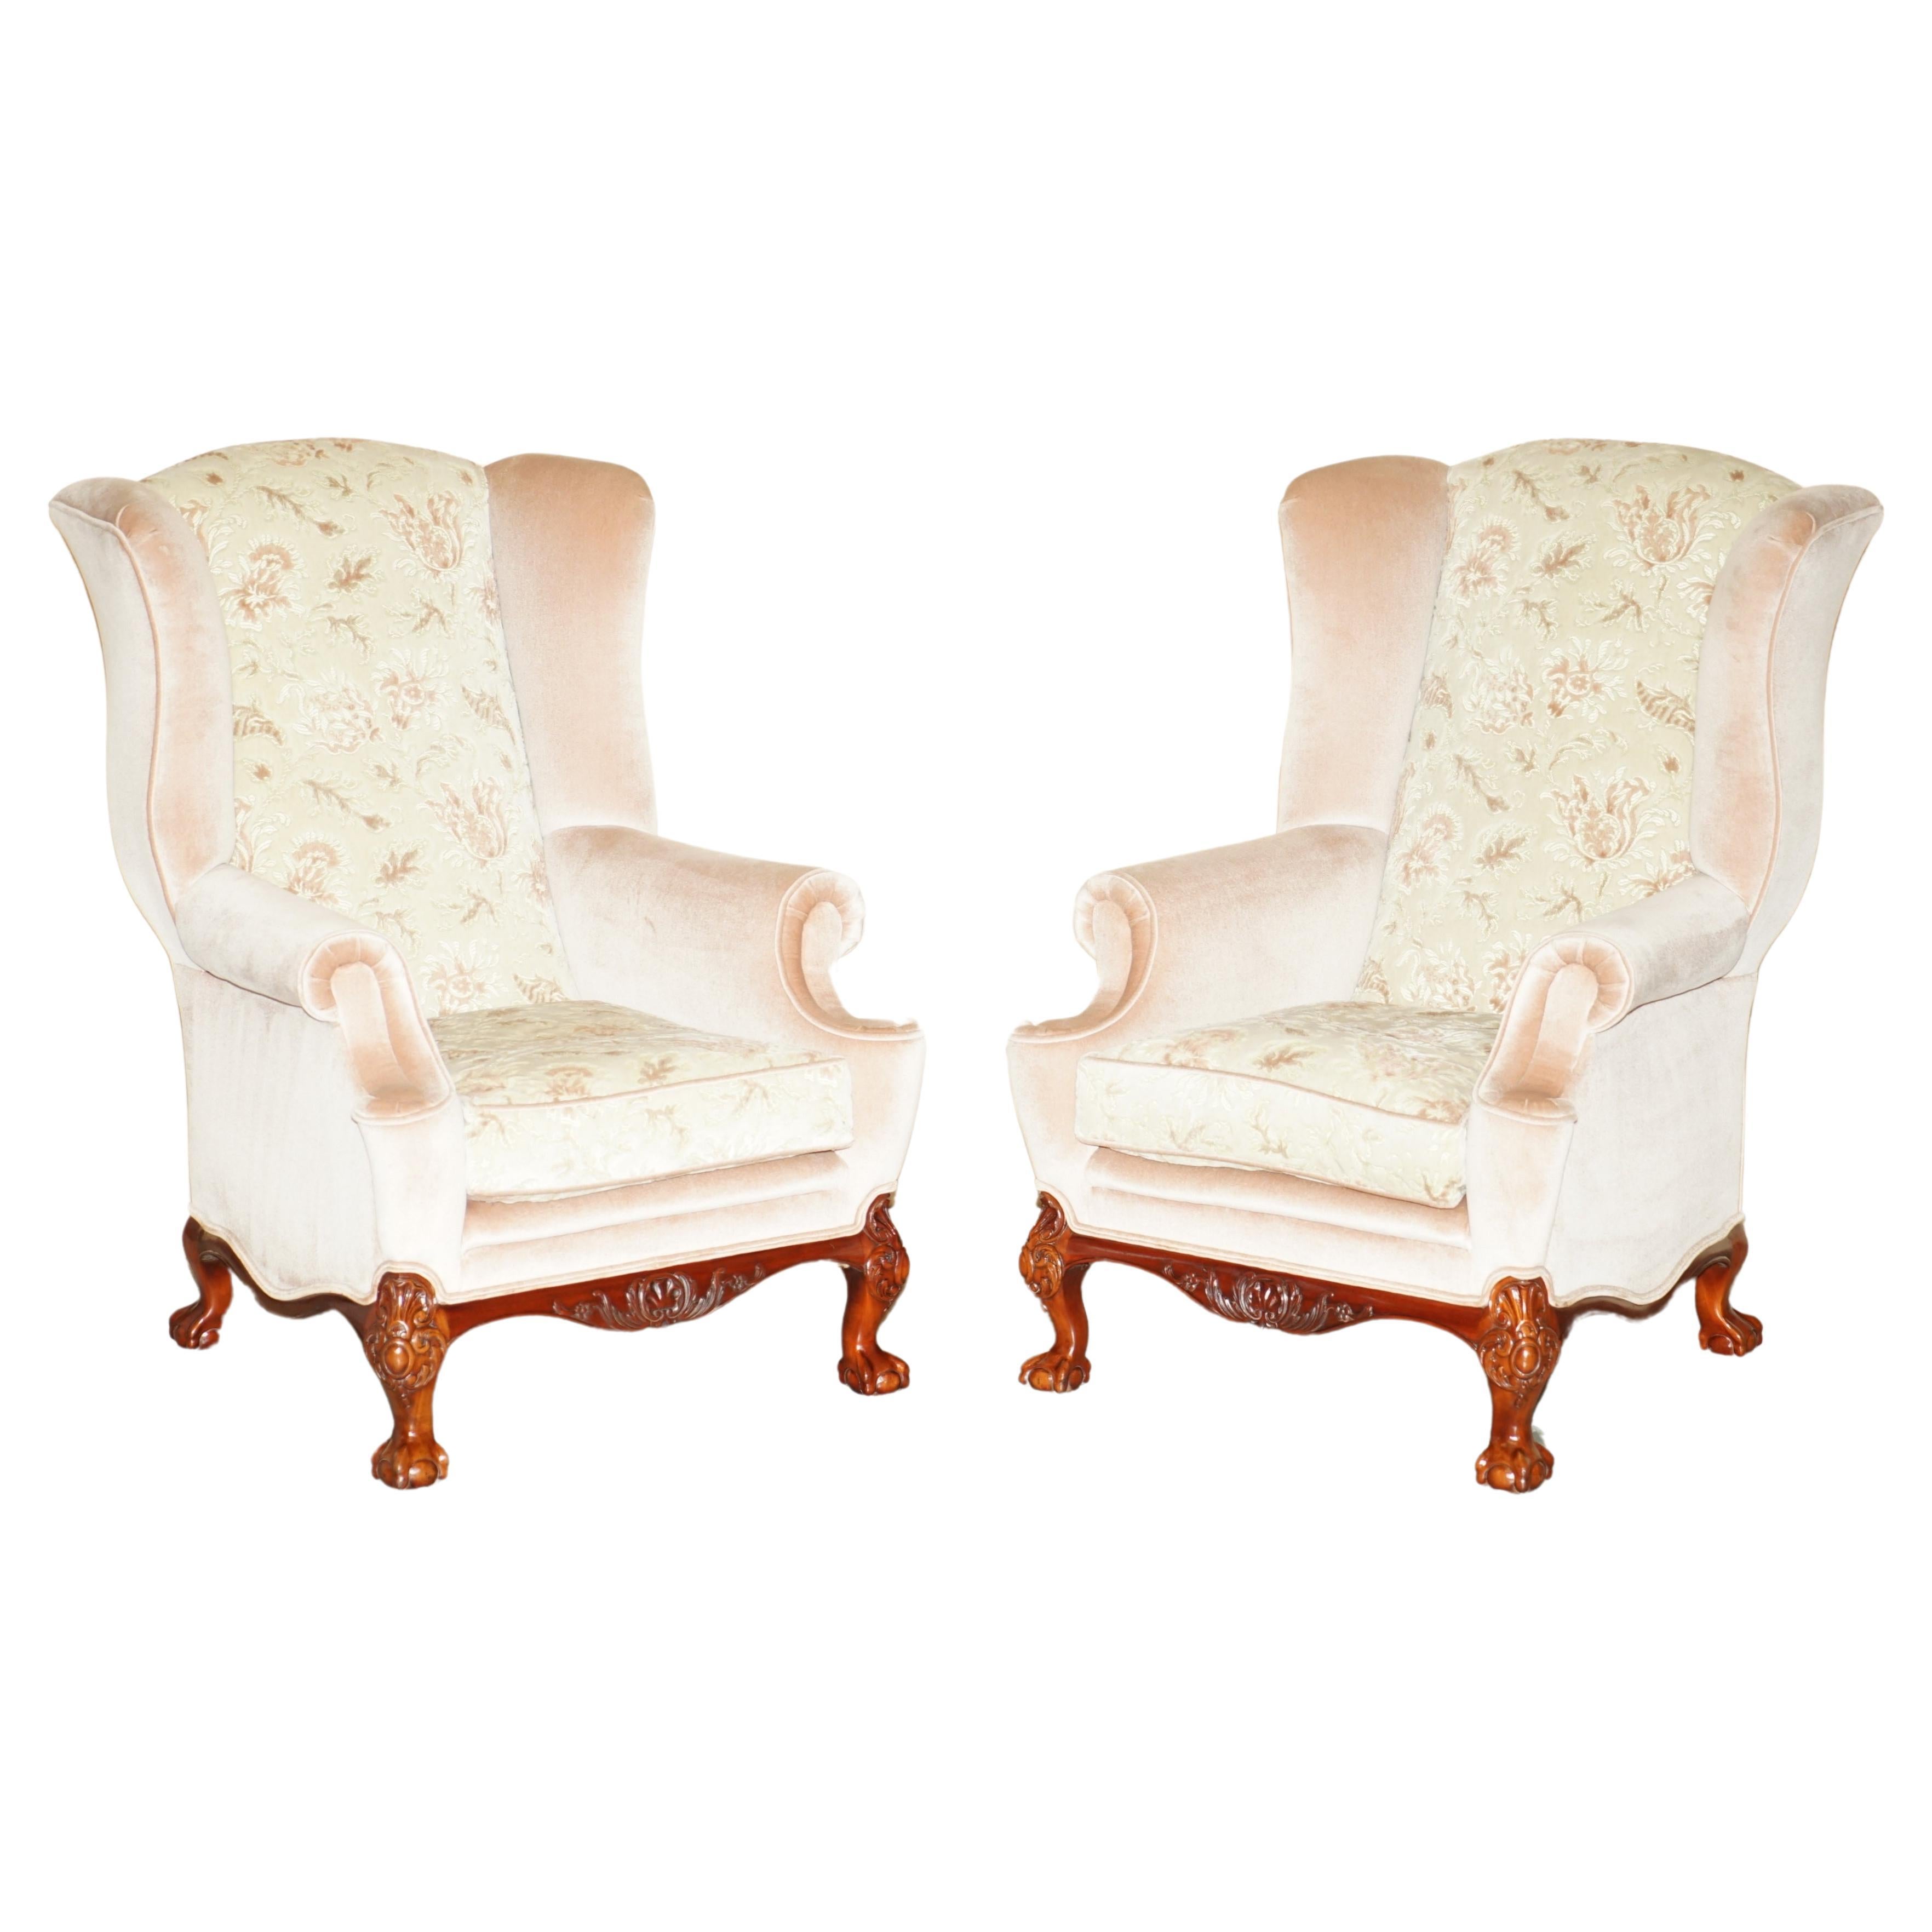 STUNNING PAIR OF VICTORIAN STYLE CLAW & BALL FEET FLORAL WINGBACK ARMCHAIRs For Sale